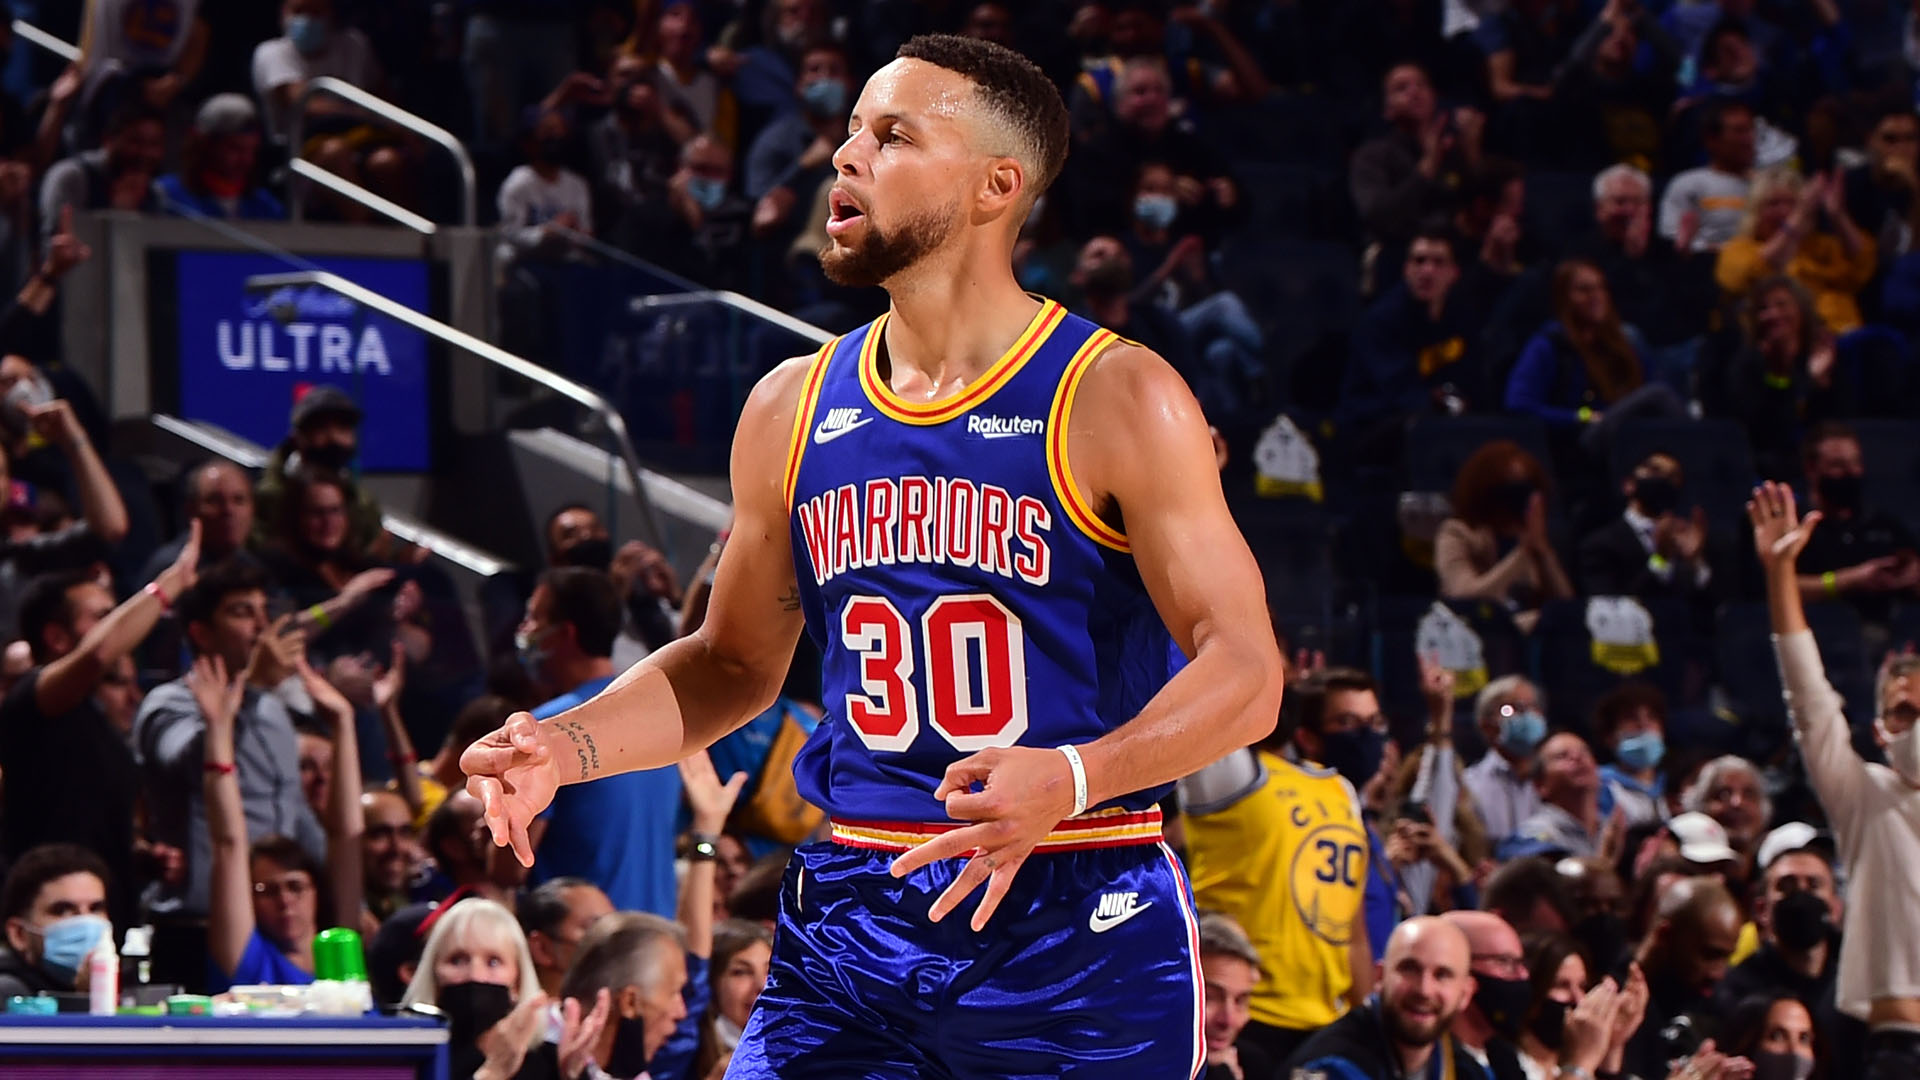 After offseason focused on perfection, Stephen Curry could be even more unstoppable